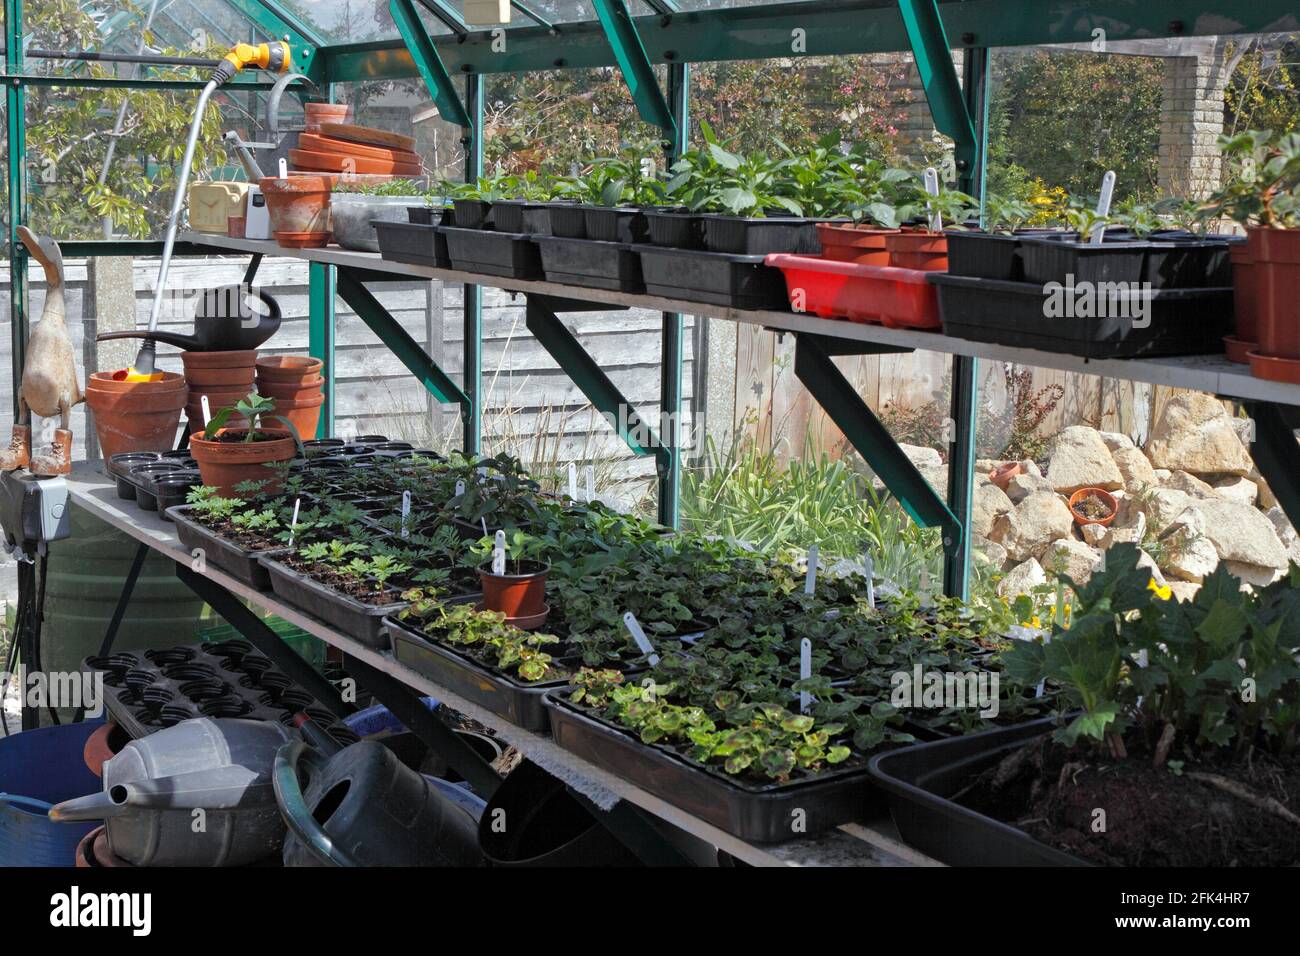 GREENHOUSE WITH PLUG PLANTS IN EARLY SPRING Stock Photo